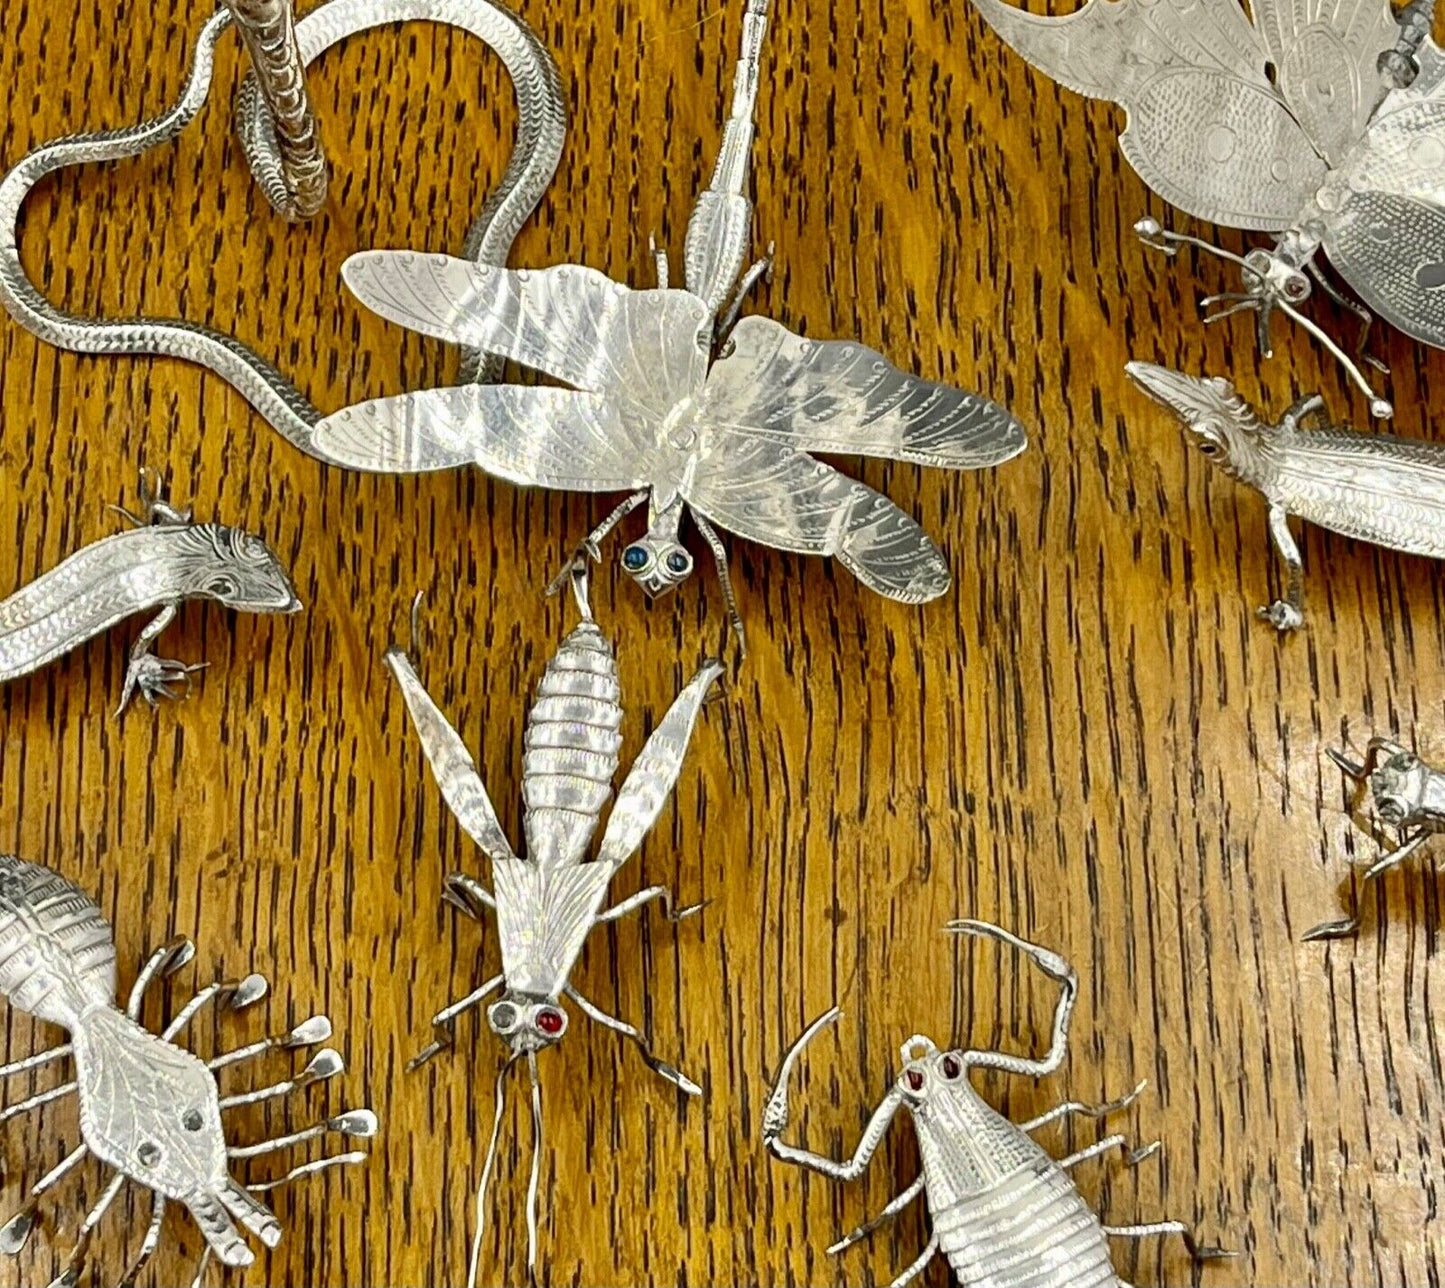 A collection of 9 silver insects and reptiles - lizard - snake - bugs etc